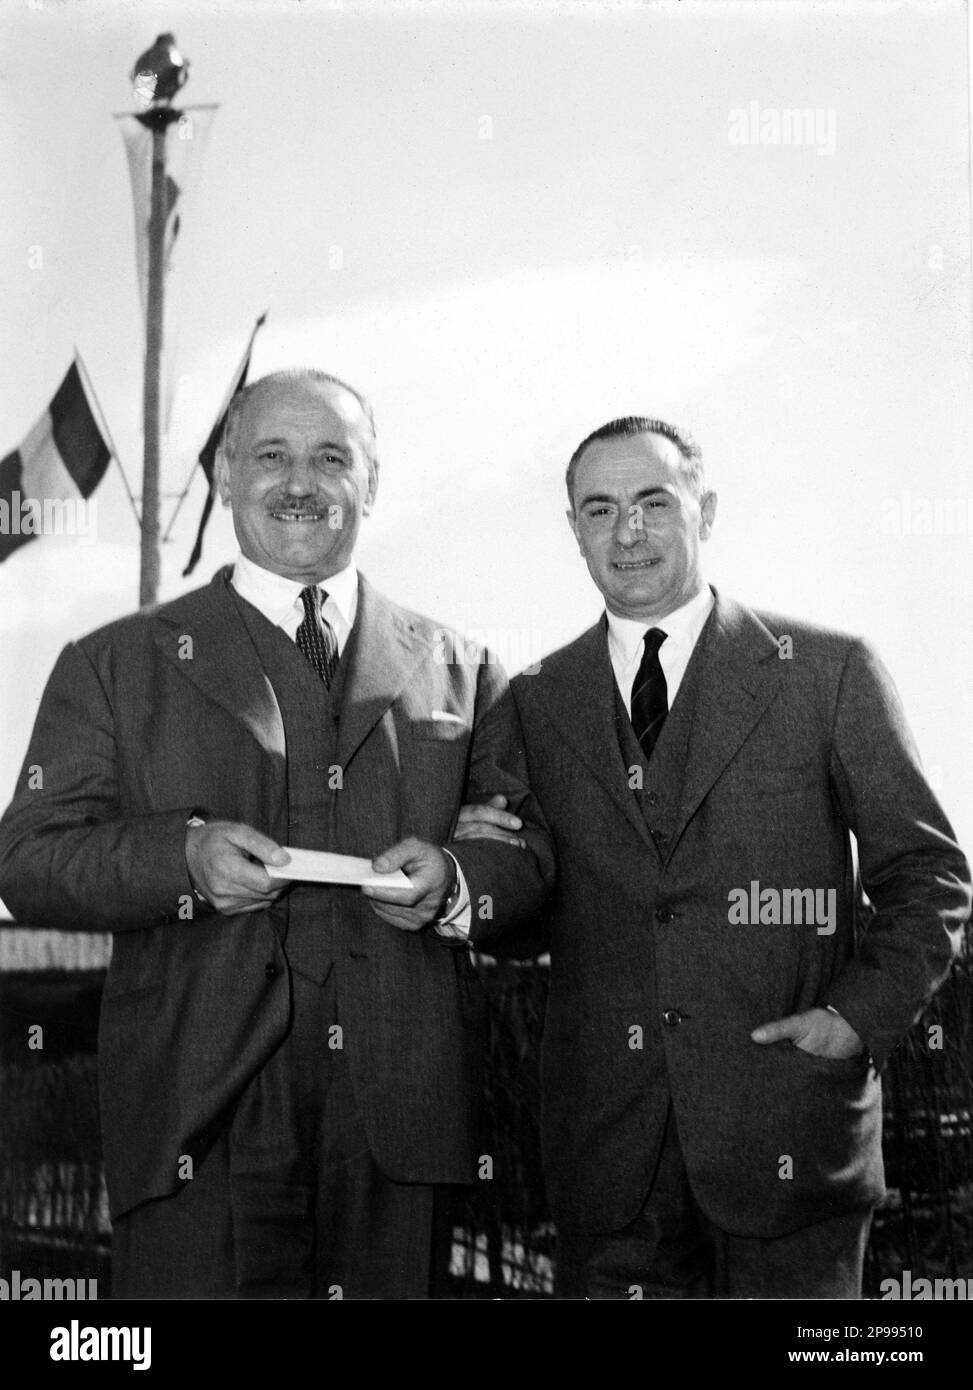 The italian politician ENRICO MATTEI  ( Acqualagna, 1906 - Bascape',  1962) was an Italian public administrator. In this photo ( at left ) with Ingenier Zannetti. Photo by Bazzecchi , Firenze . After World War II he was given the task of dismantling the Italian Petroleum Agency Agip, a state enterprise established by the Fascist regime. Instead Mattei enlarged and reorganized it into the National Fuel Trust Ente Nazionale Idrocarburi ( ENI ). Under his direction ENI negotiated important oil concessions in the Middle East as well as a significant trade agreement with the Soviet Union which help Stock Photo